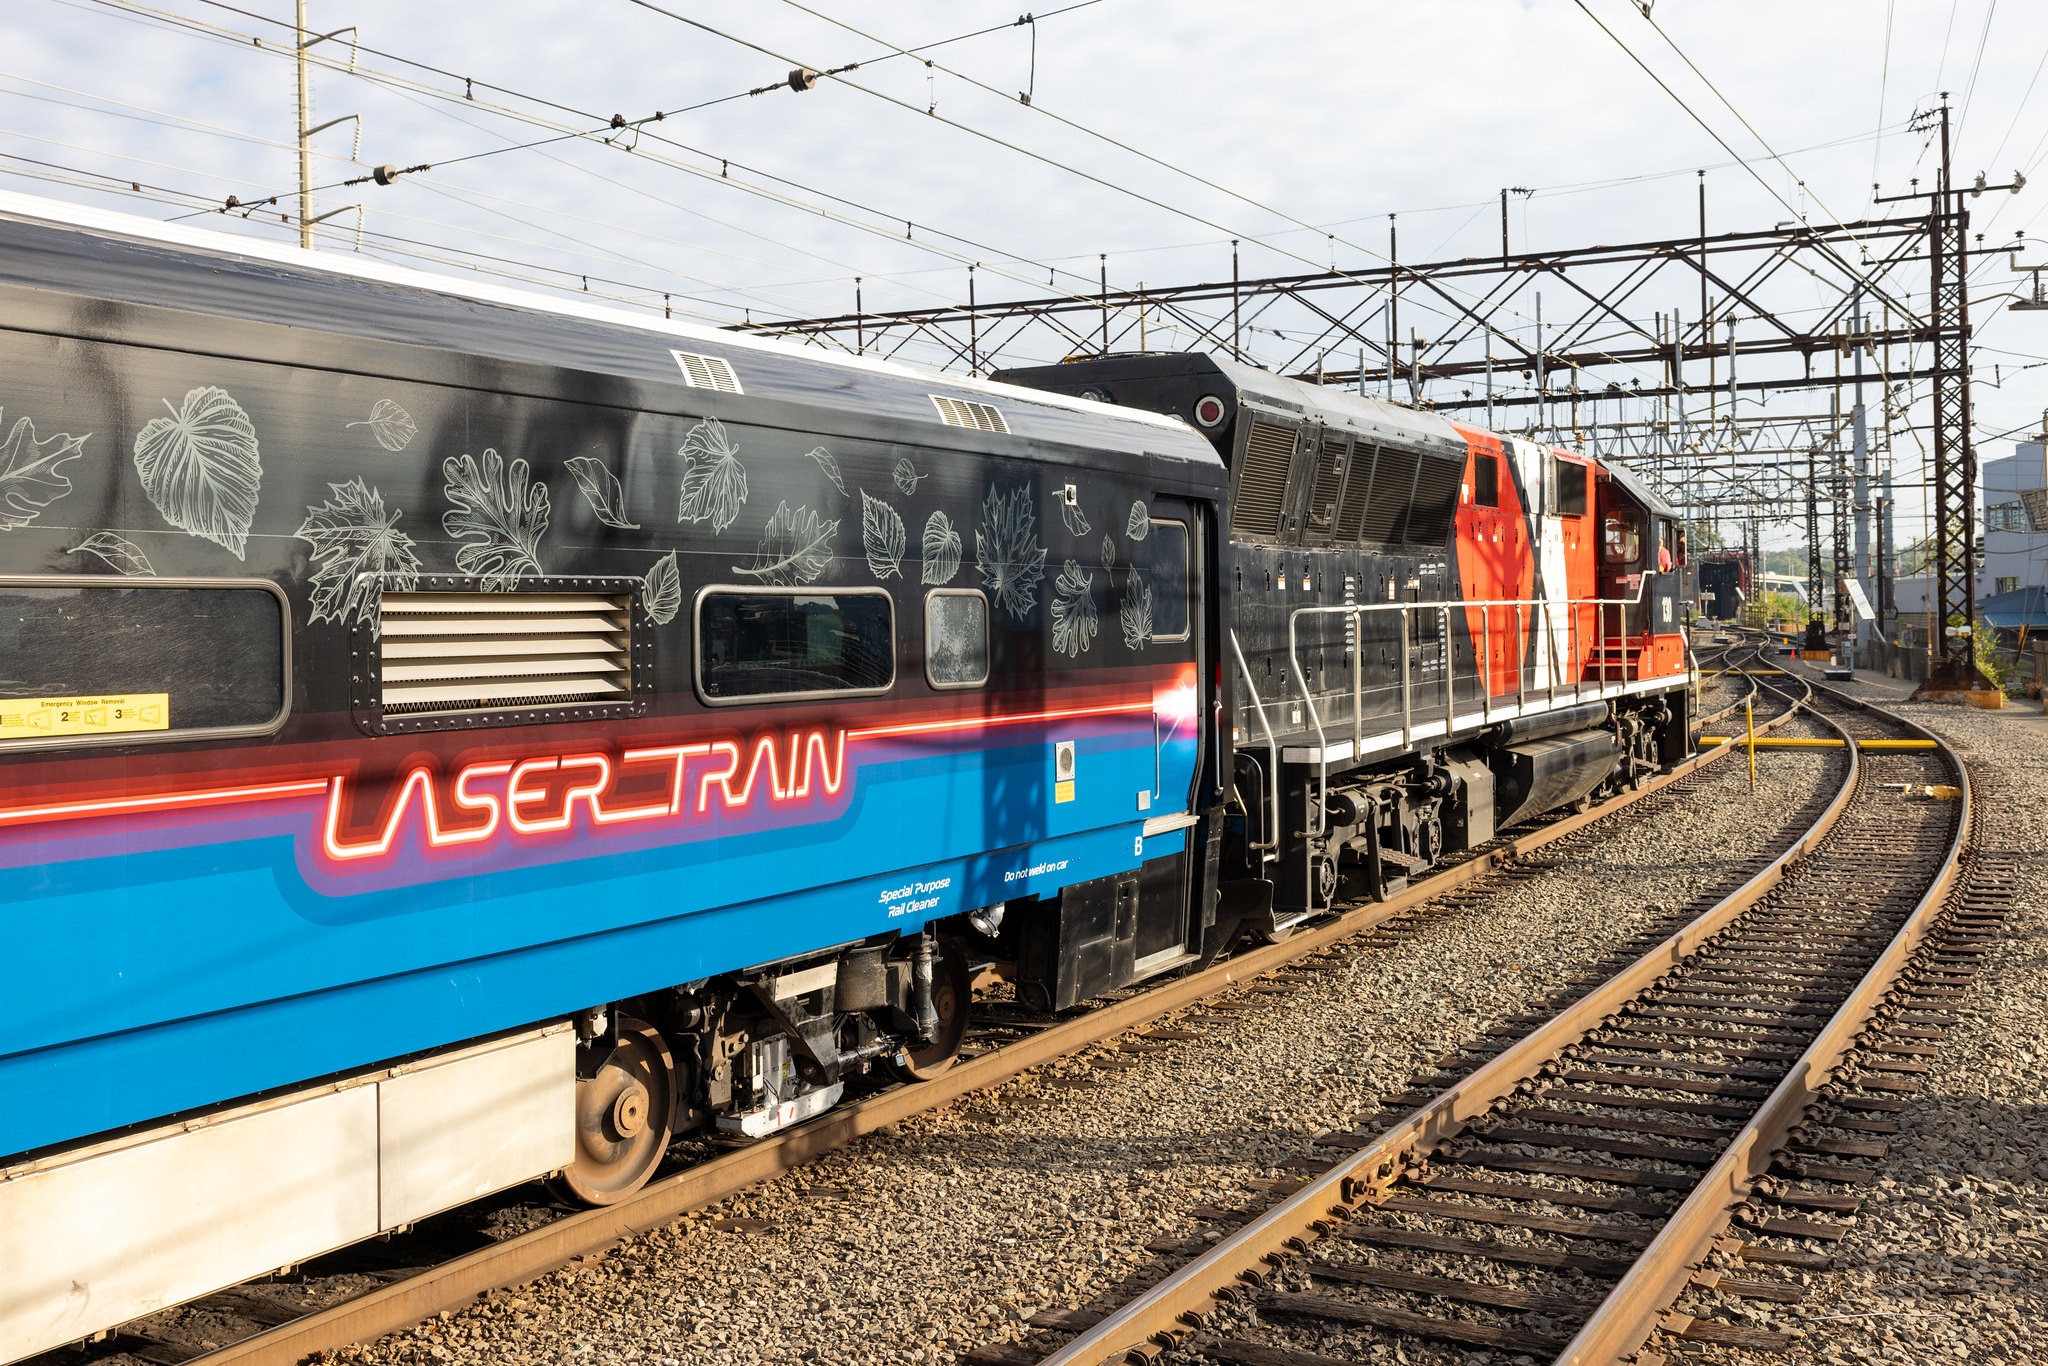 A train car with a colorful wrap that says "laser train"